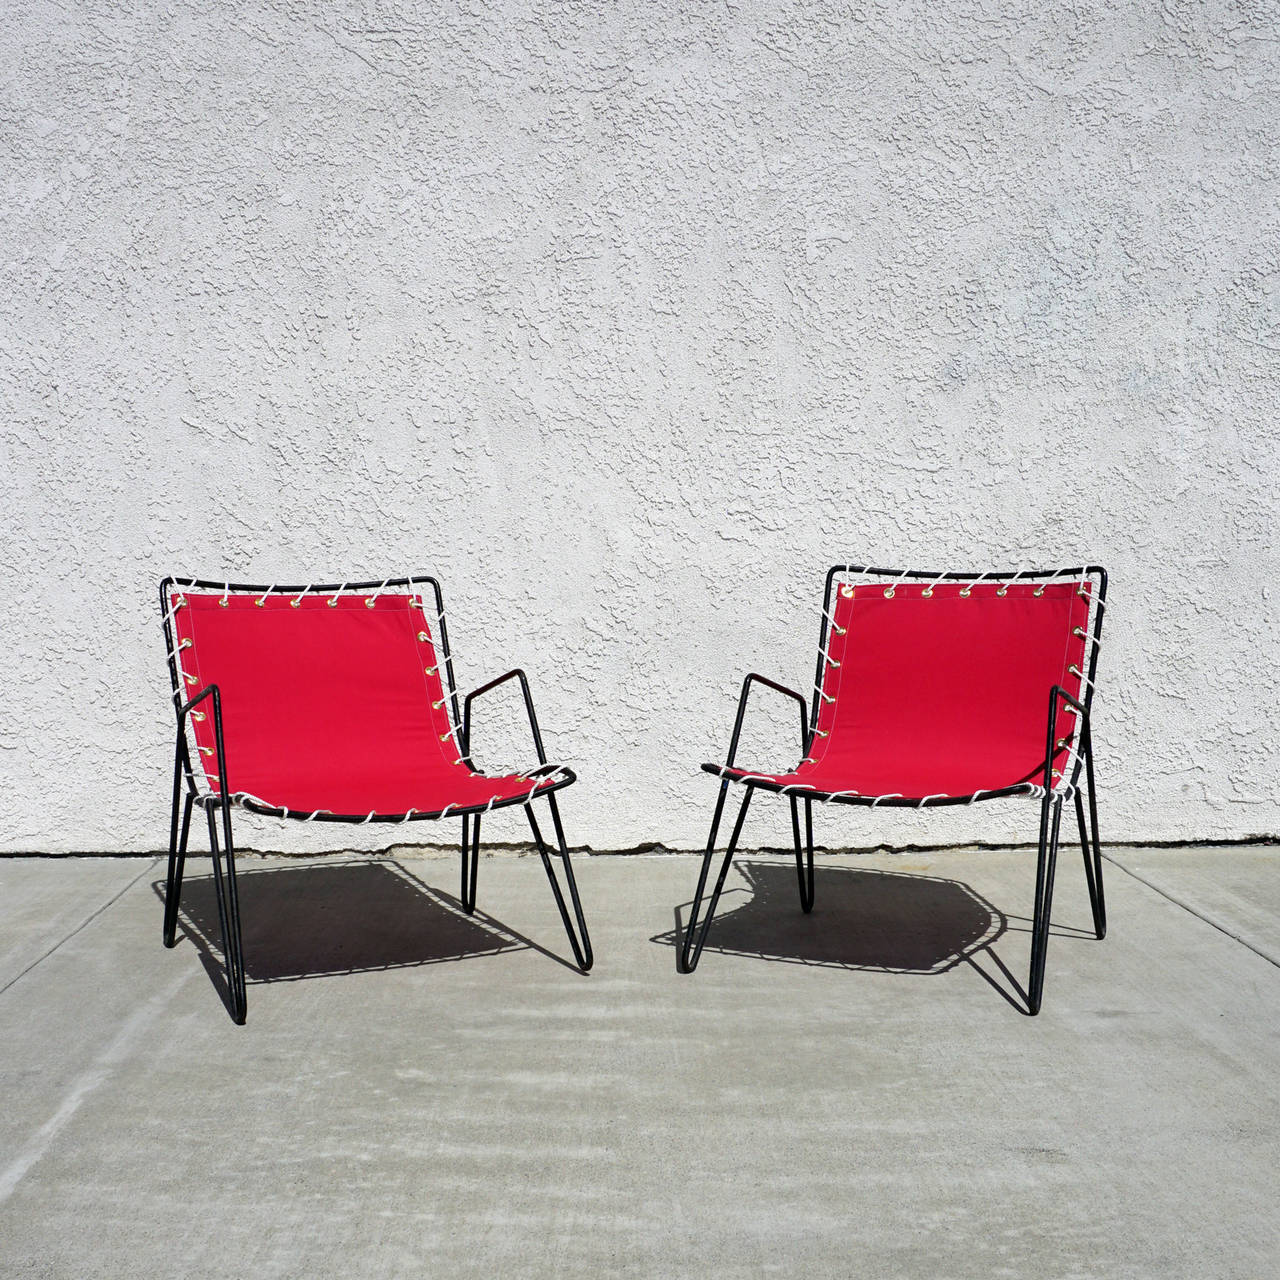 A pair of 1950s vintage iron and canvas sling chairs. The new slings are made of Sunbrella fabric.